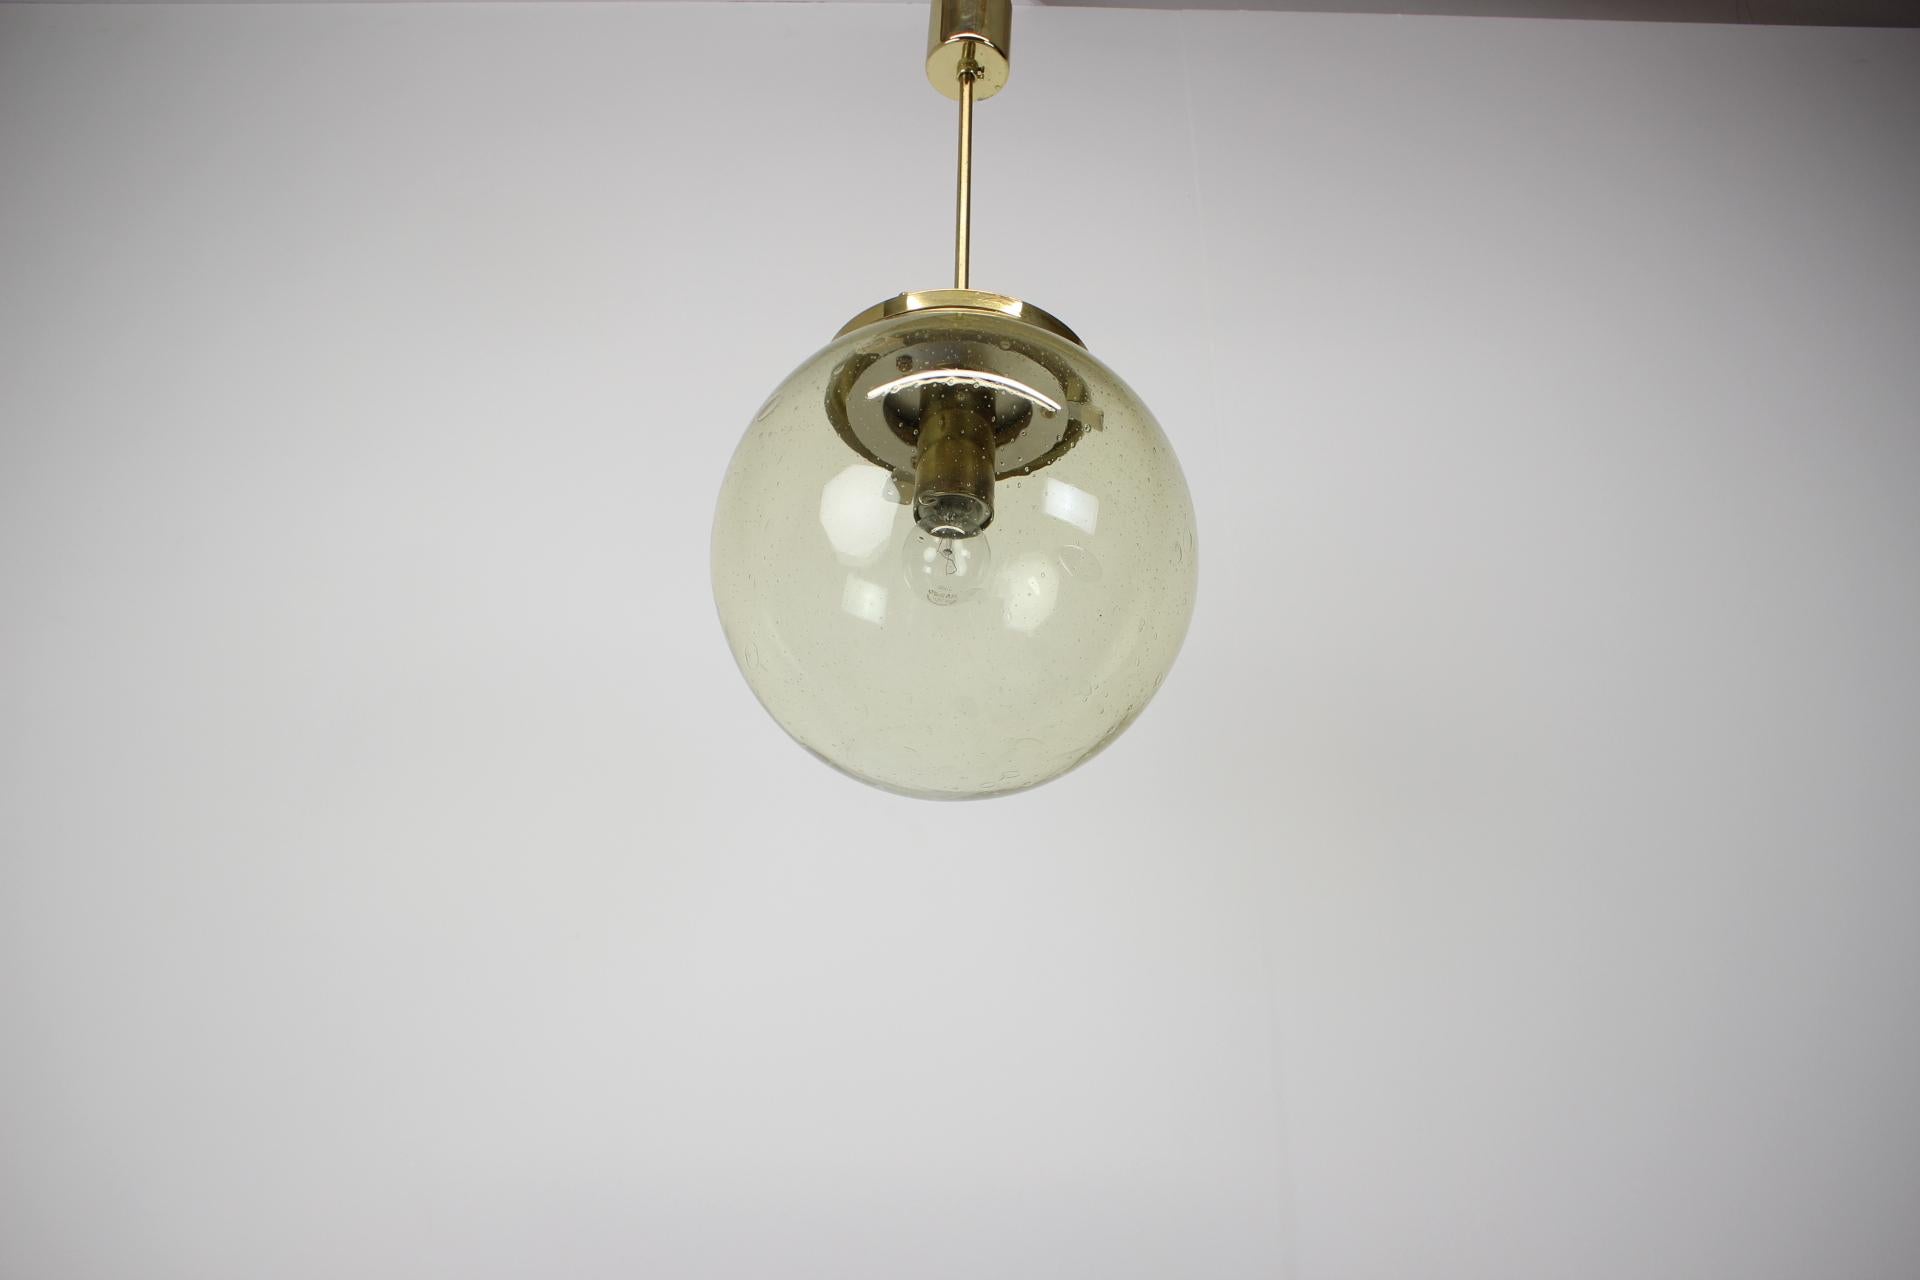 Made in Czechoslovakia
Made of Glass, Brass
With aged patina
1x E27 or E26 bulb
US wiring compatible
Good Original condition.